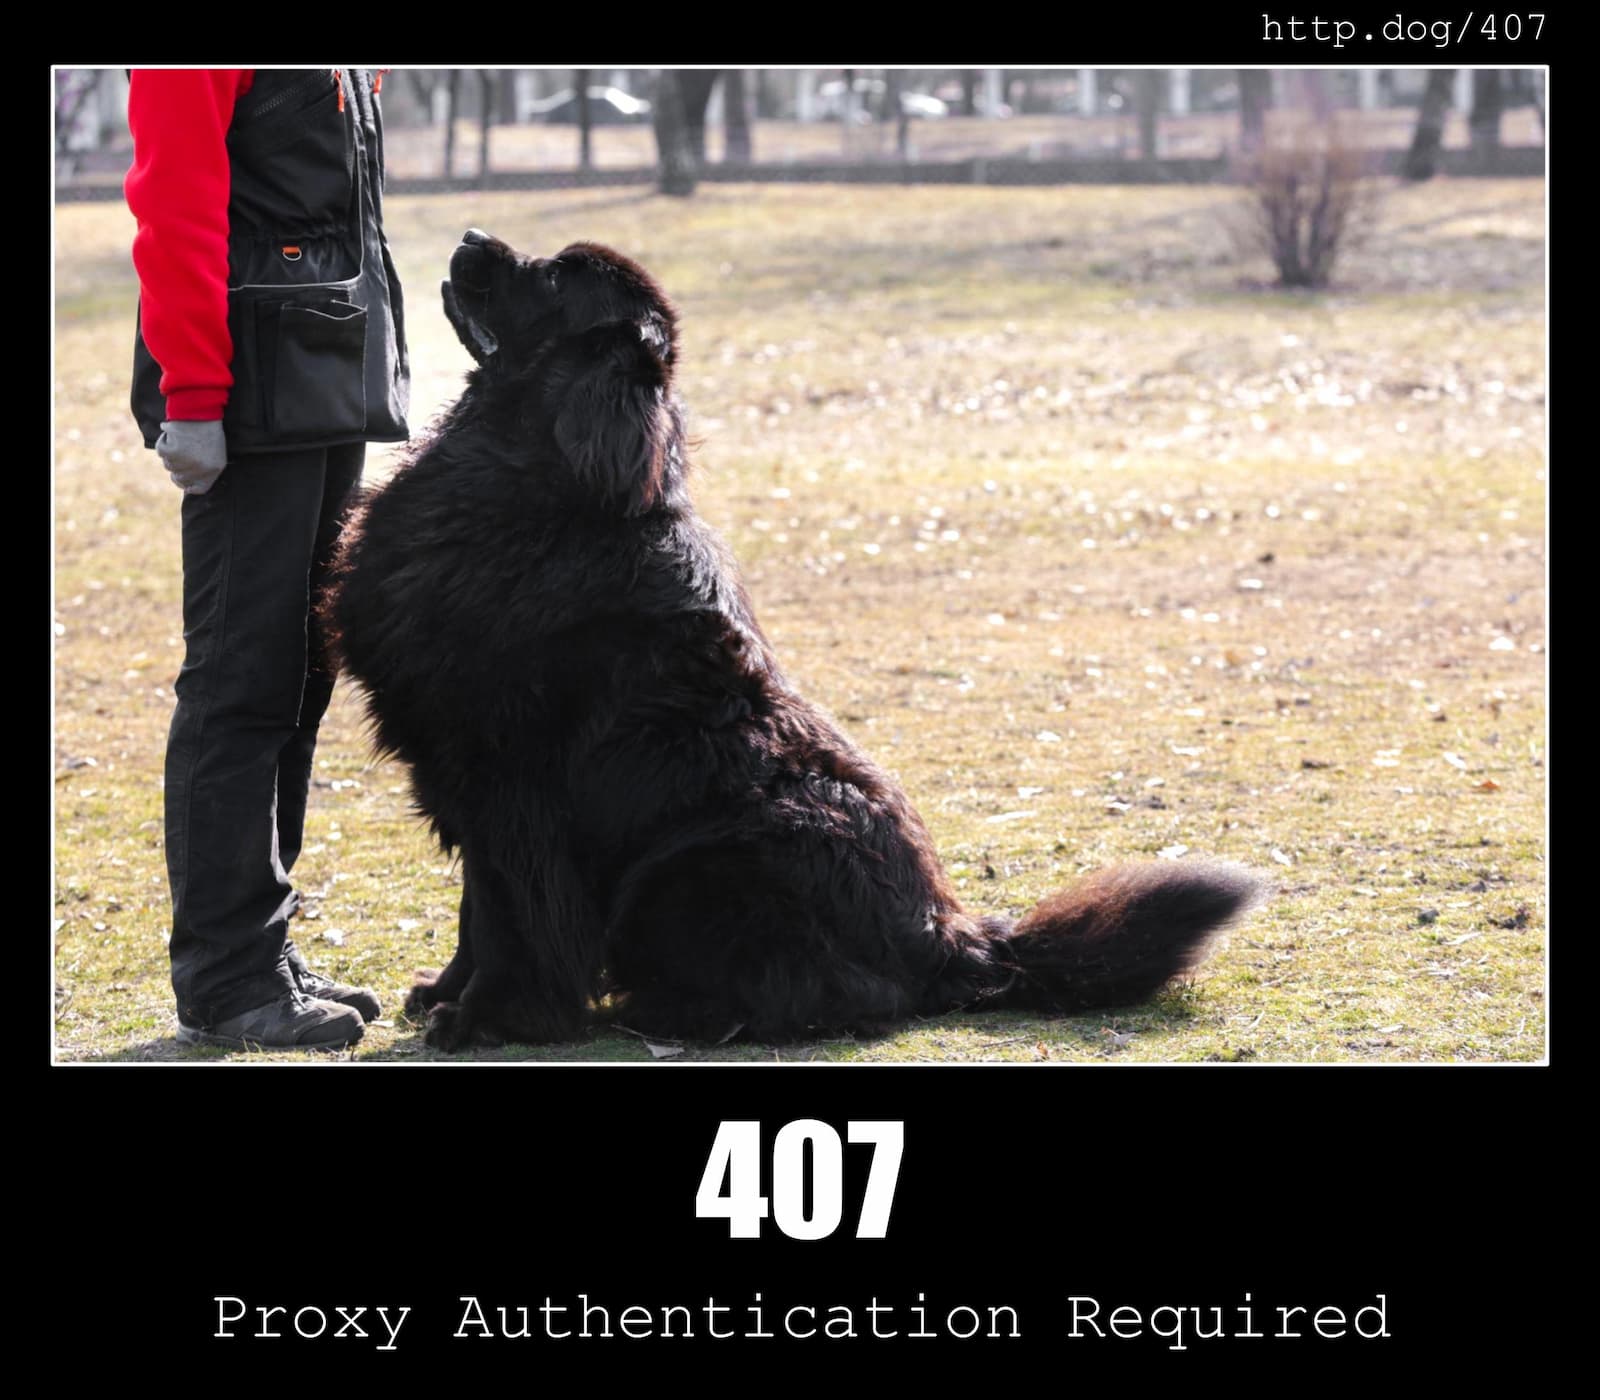 HTTP Status Code 407 Proxy Authentication Required